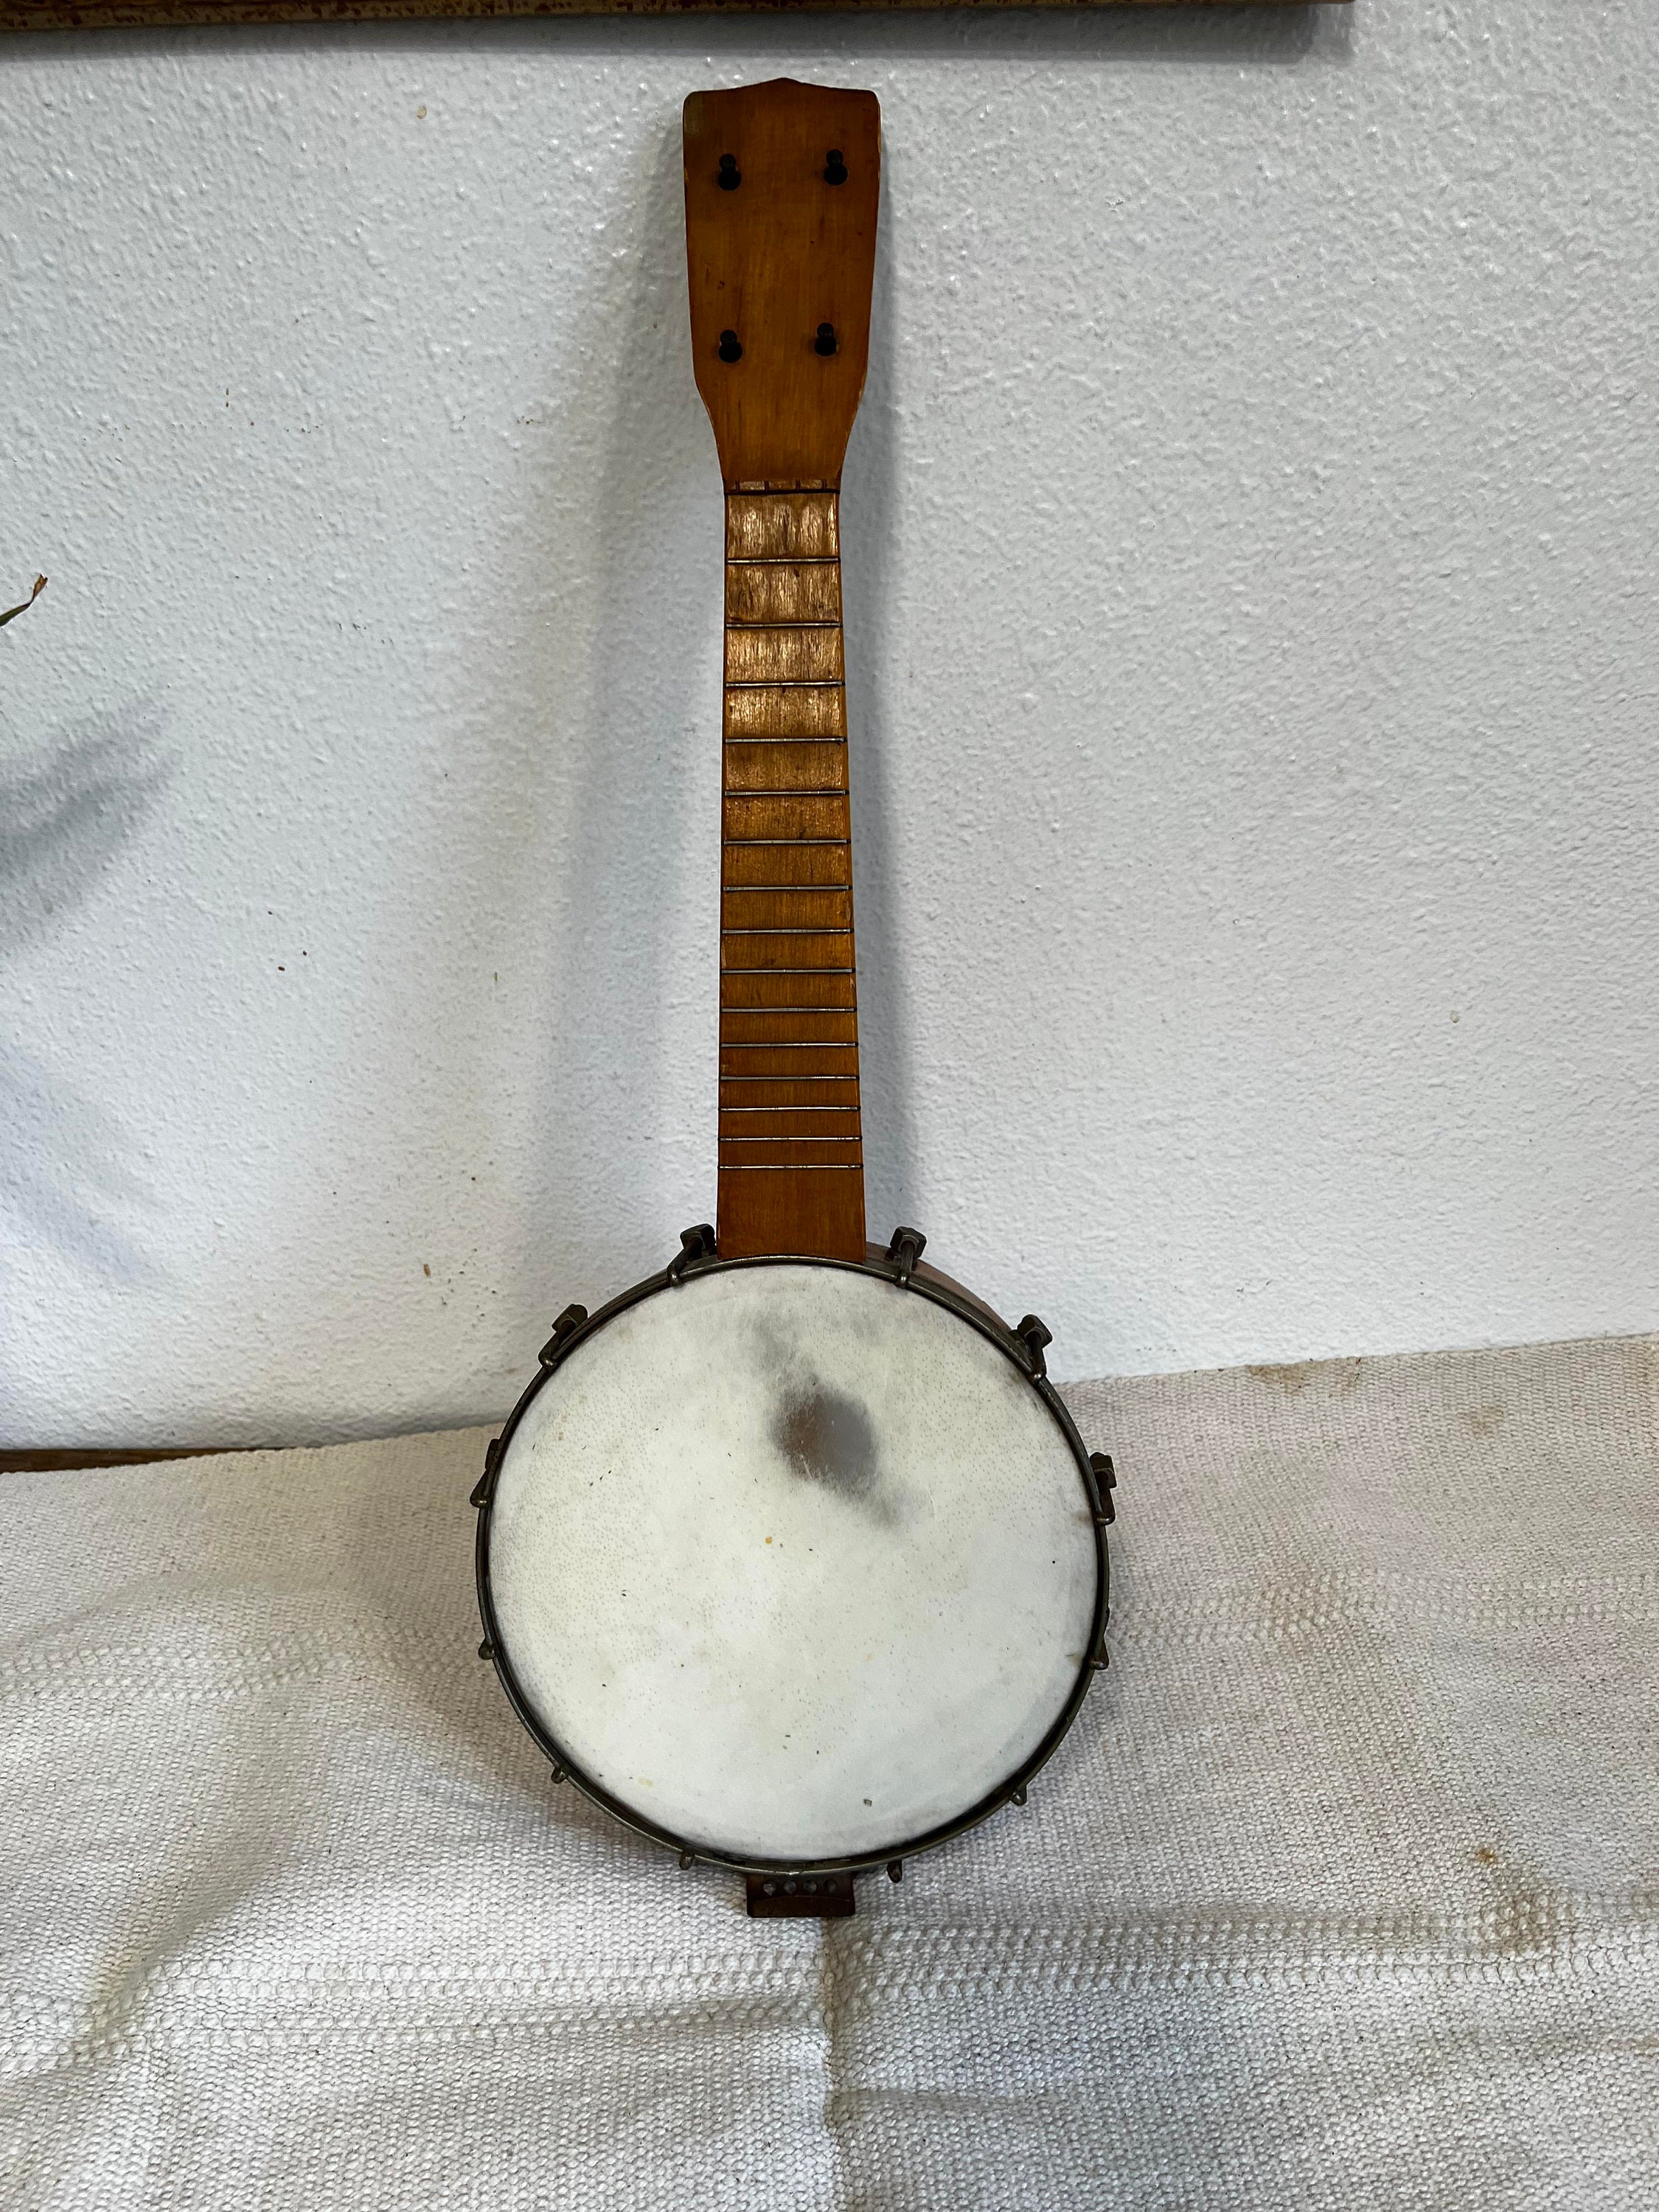 tickle-me banjo wooden vintage toy musical instrument decoration VERY RARE